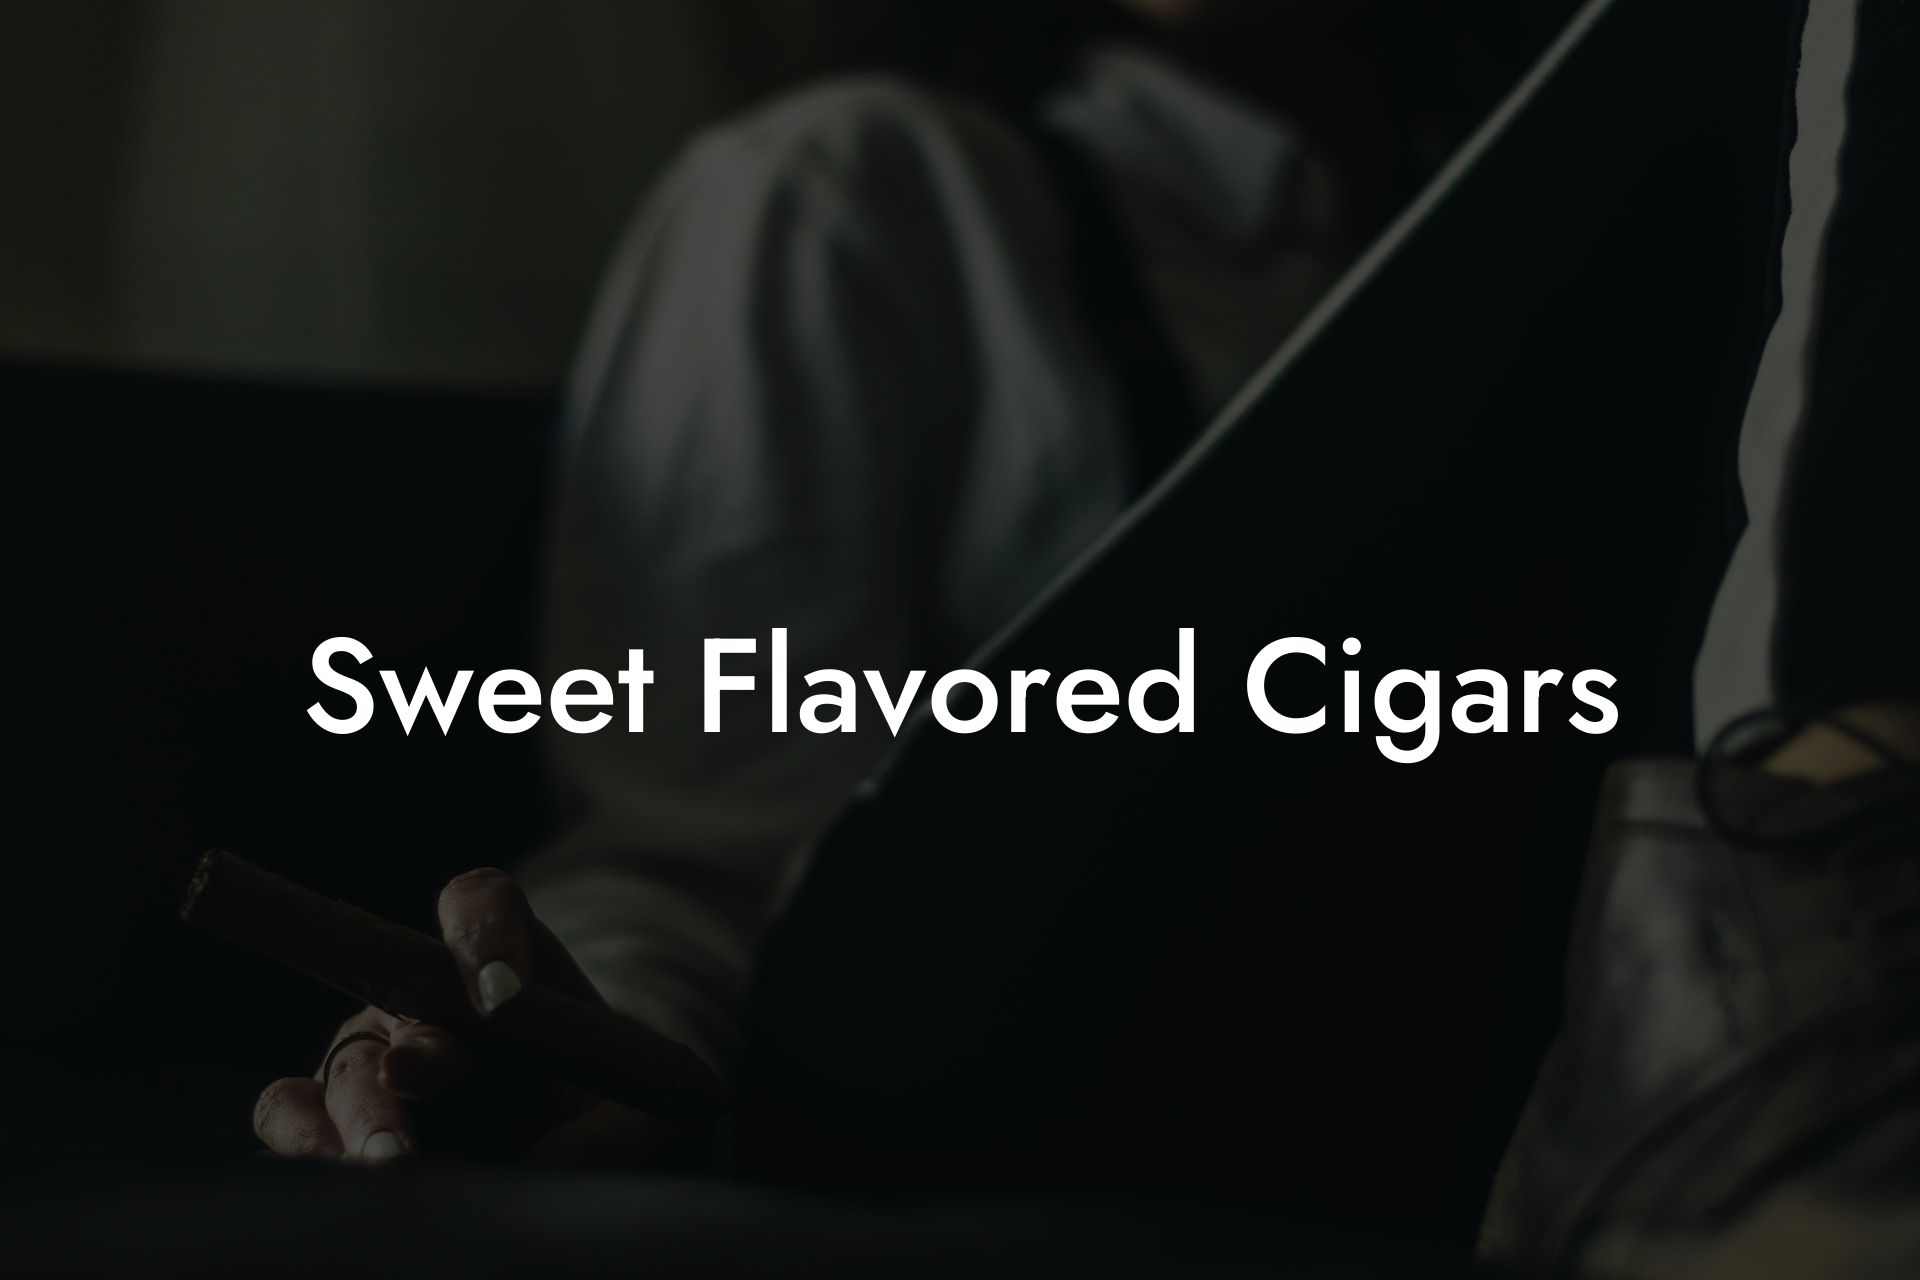 Sweet Flavored Cigars